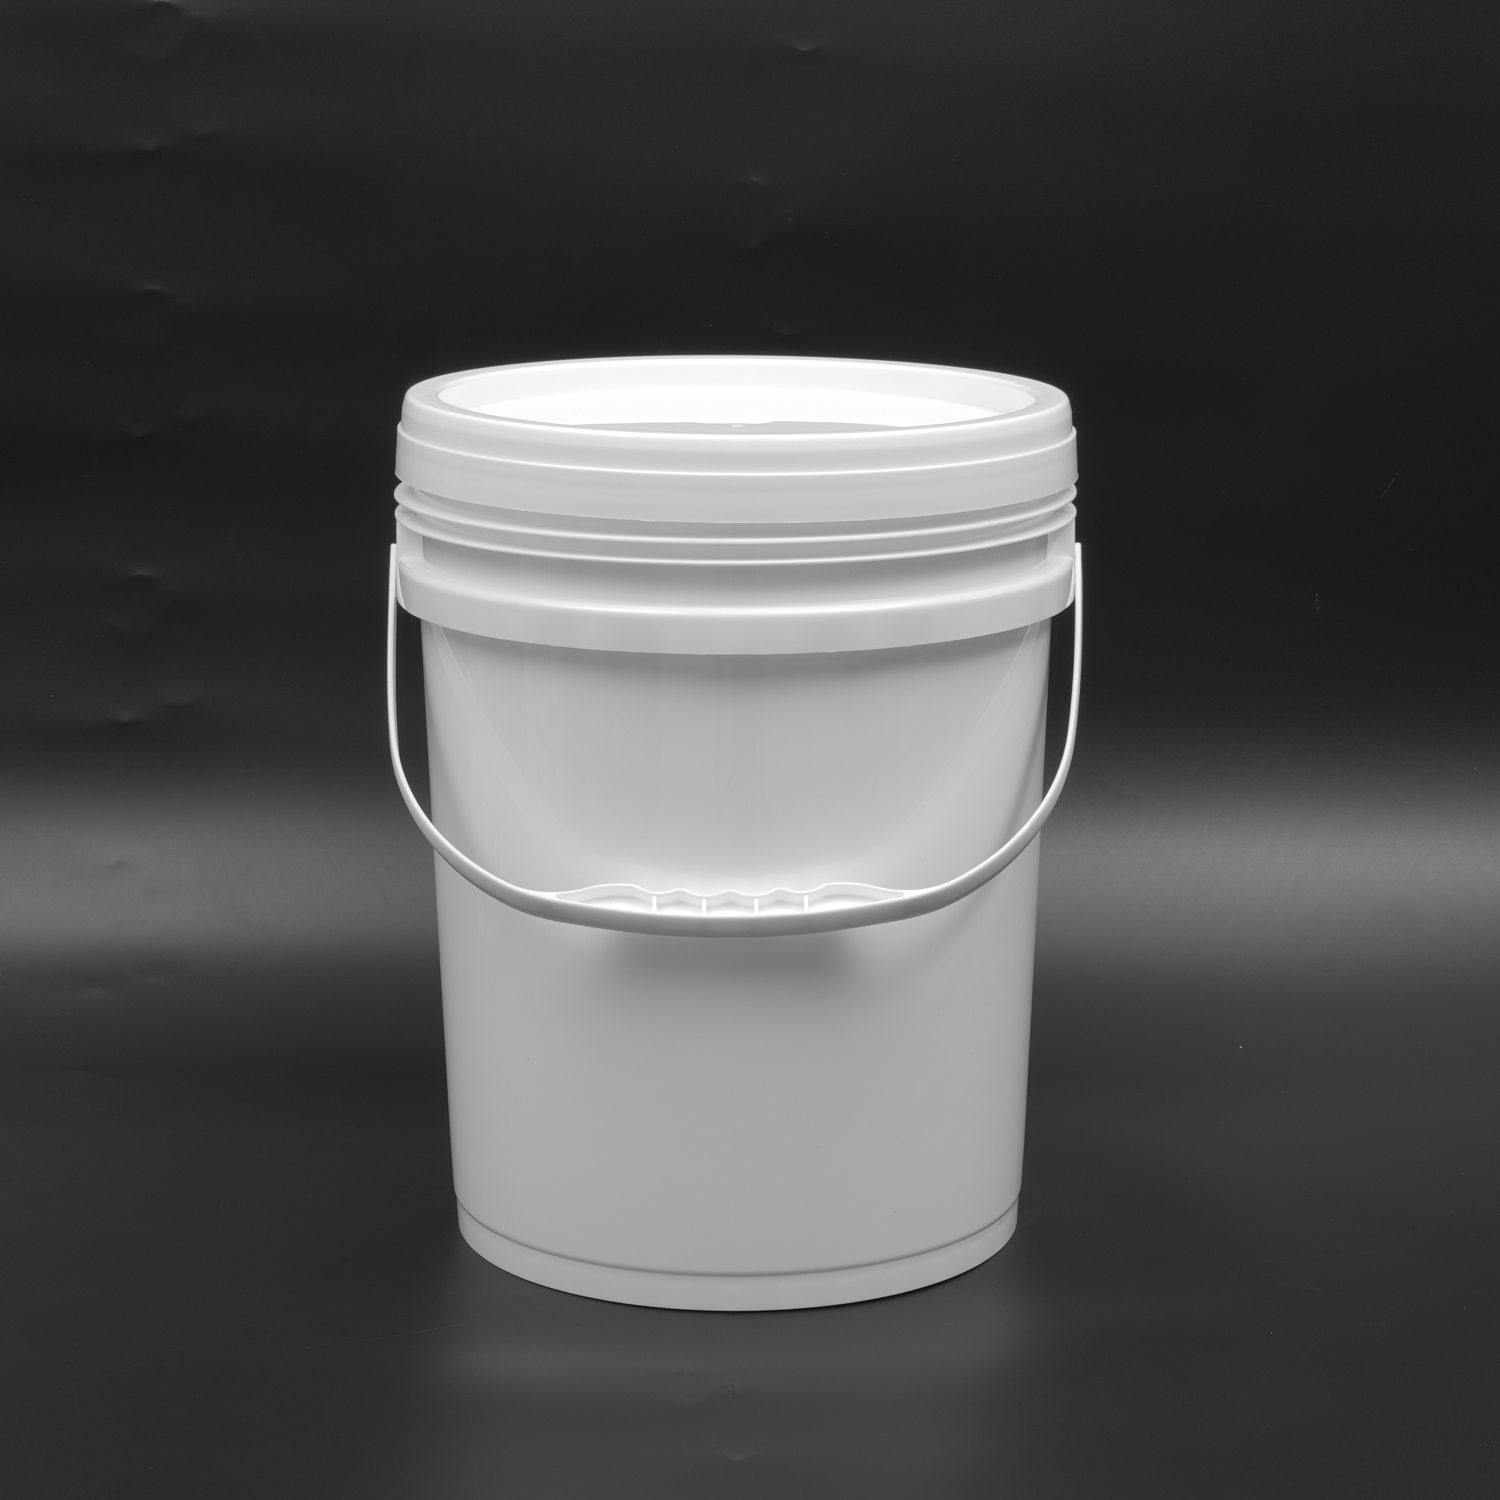 20L PP Plastic Bucket B15-NR for Water Basic Paint Containing